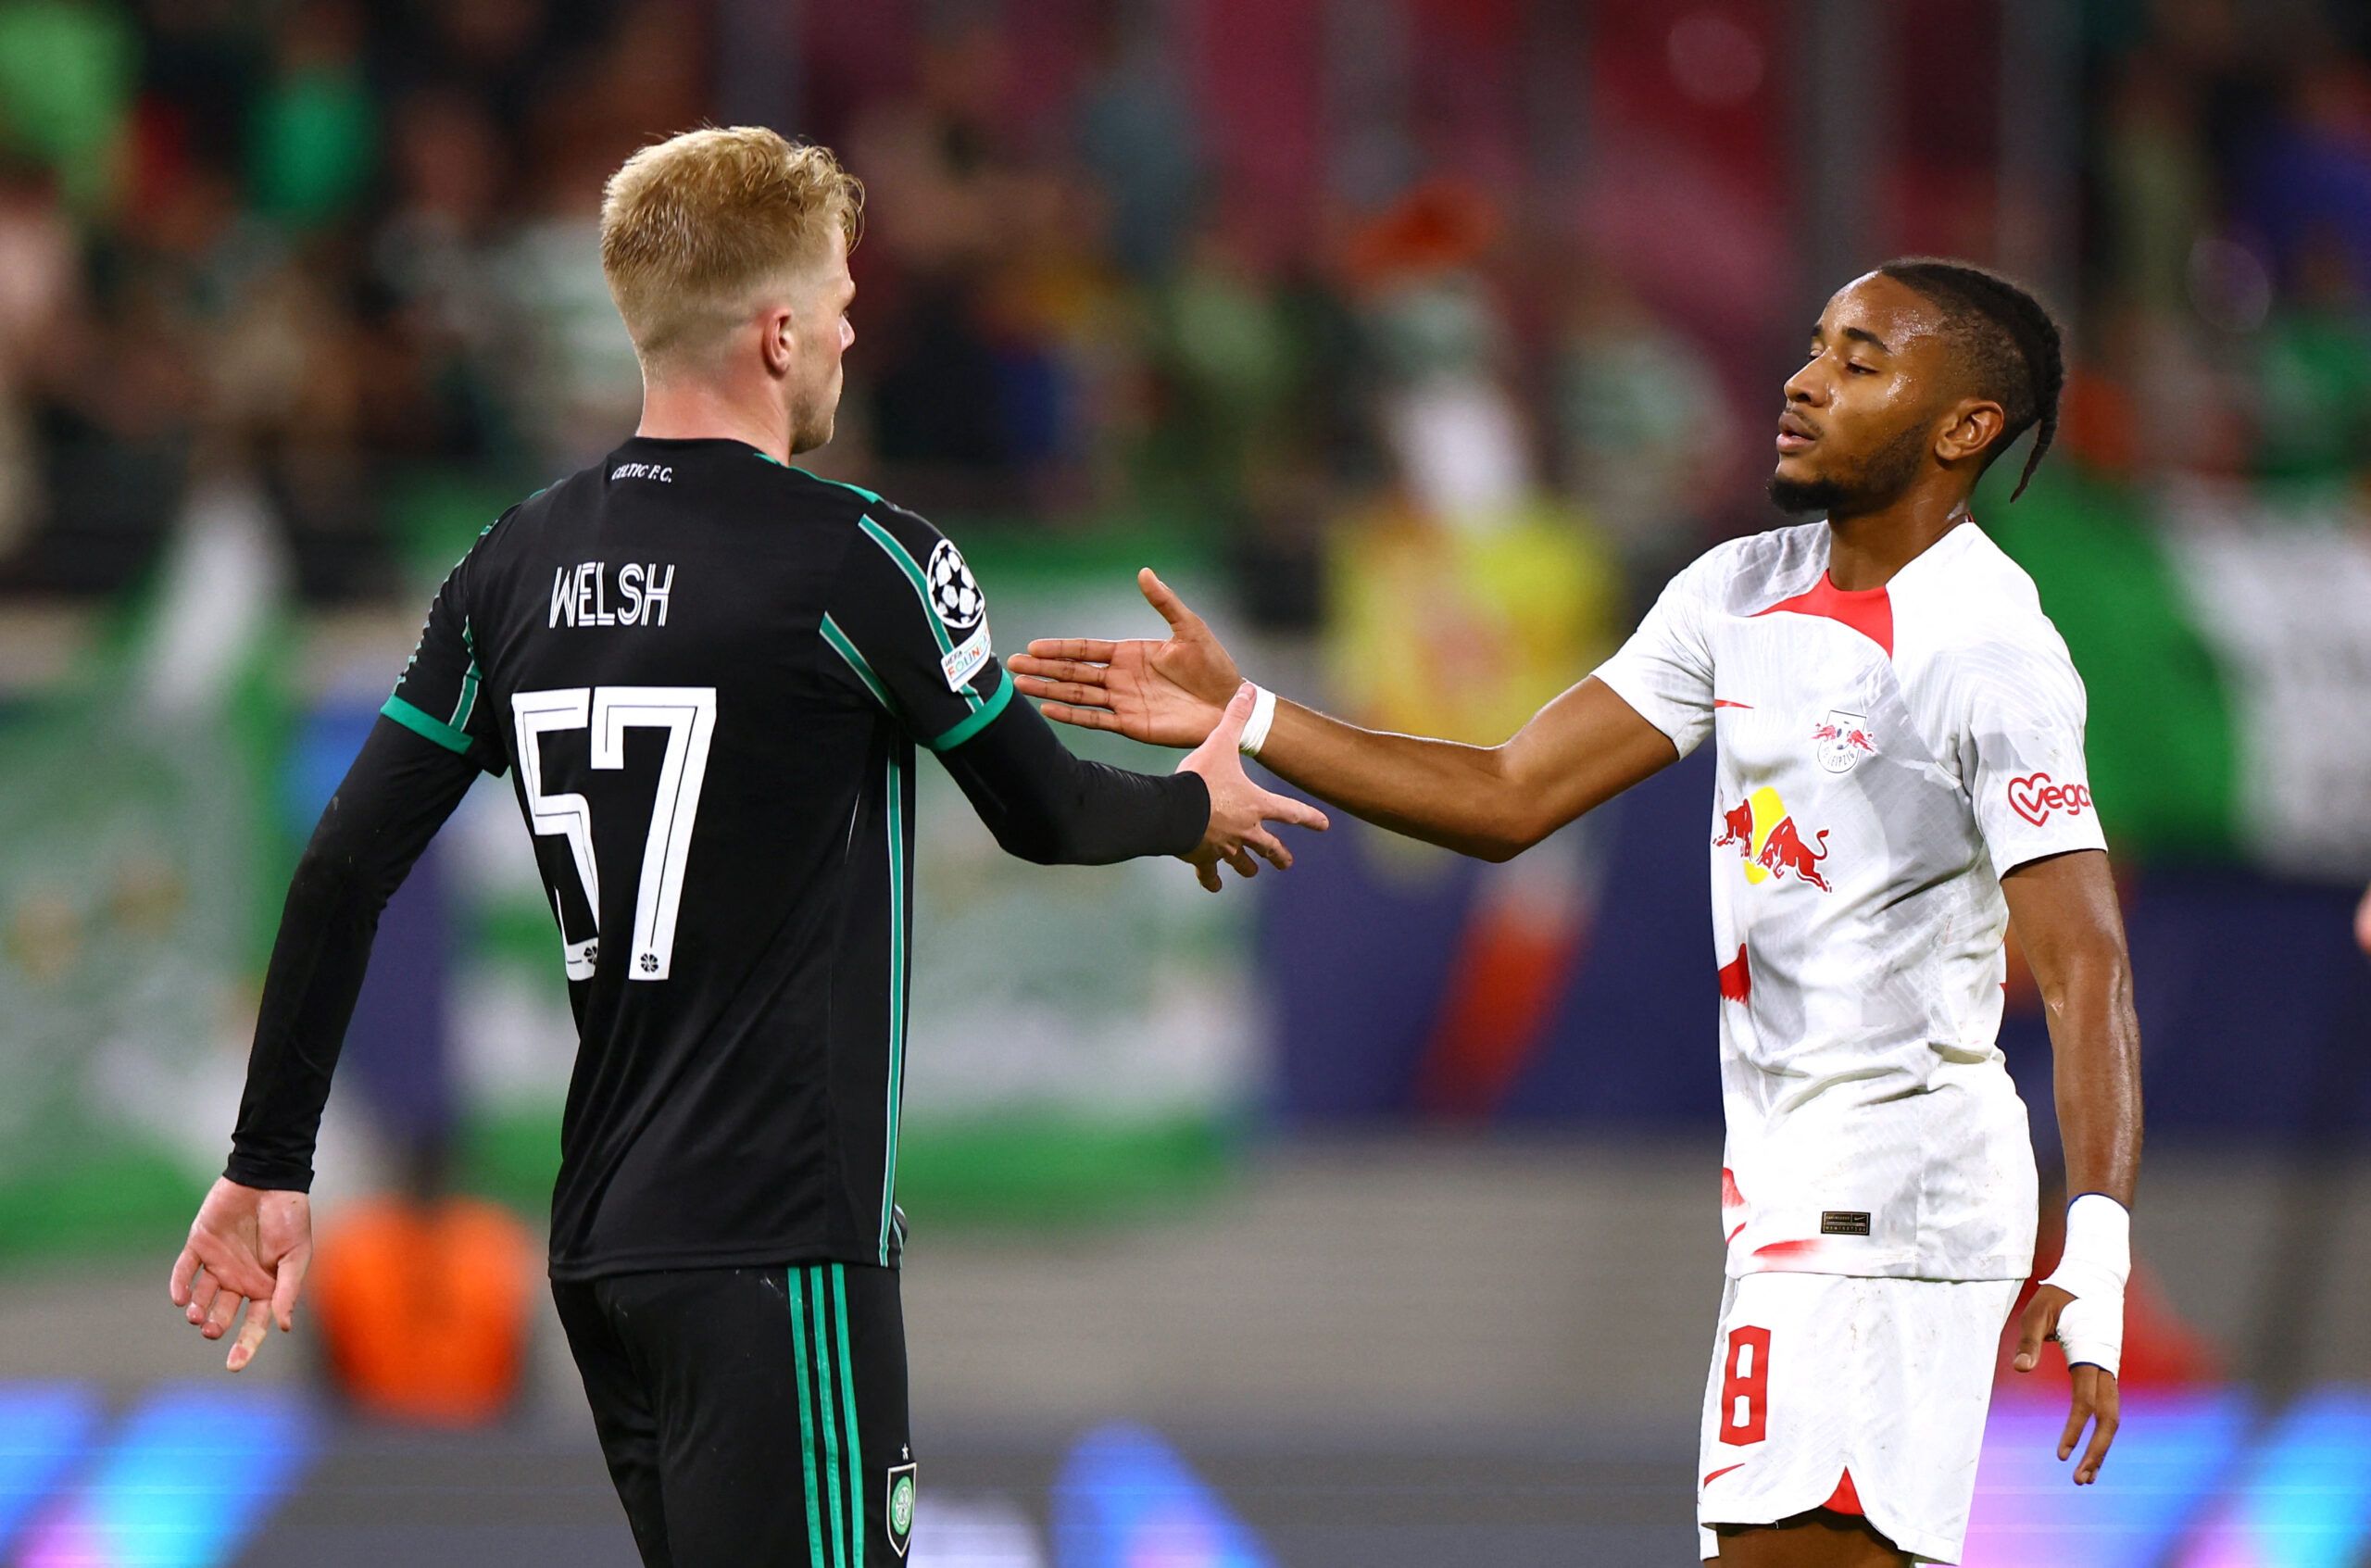 Soccer Football - Champions League - Group F - RB Leipzig v Celtic - Red Bull Arena, Leipzig, Germany - October 5, 2022 RB Leipzig's Christopher Nkunku shakes hands with Celtic's Stephen Welsh after the match REUTERS/Lisi Niesner